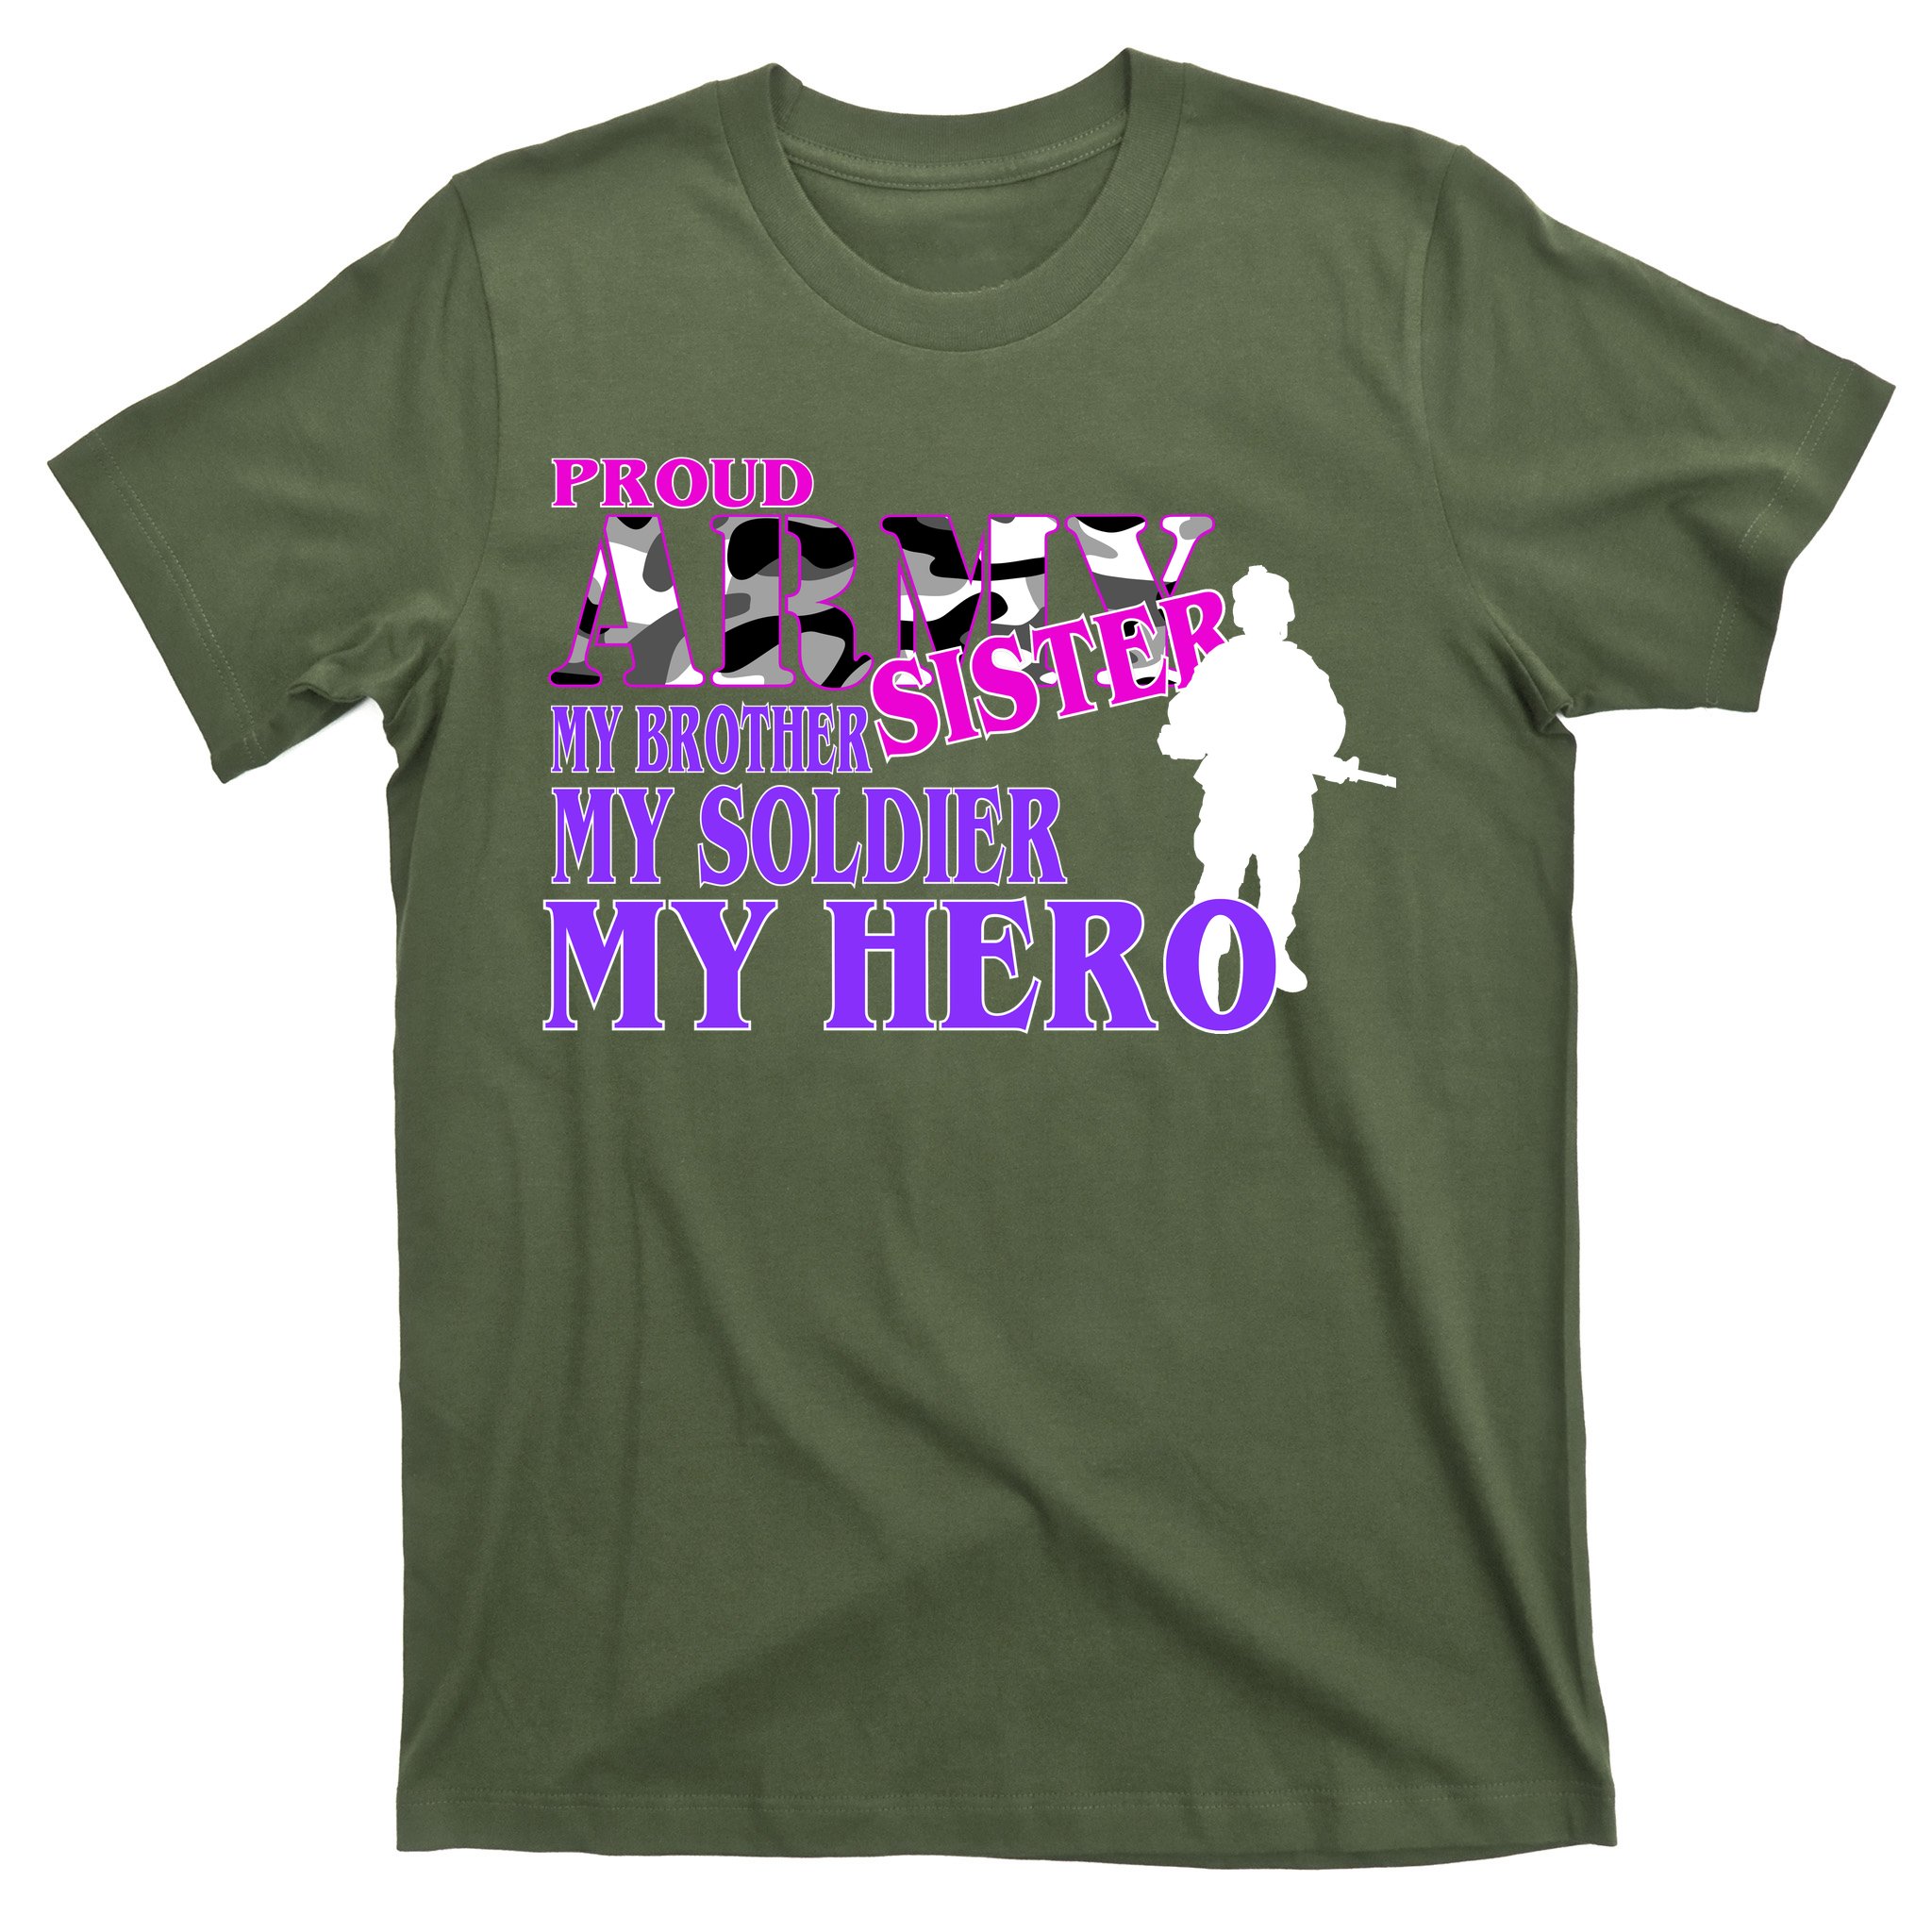 Unisex T-Shirt in Tri-Blend Fabric Our Soldier Our Hero